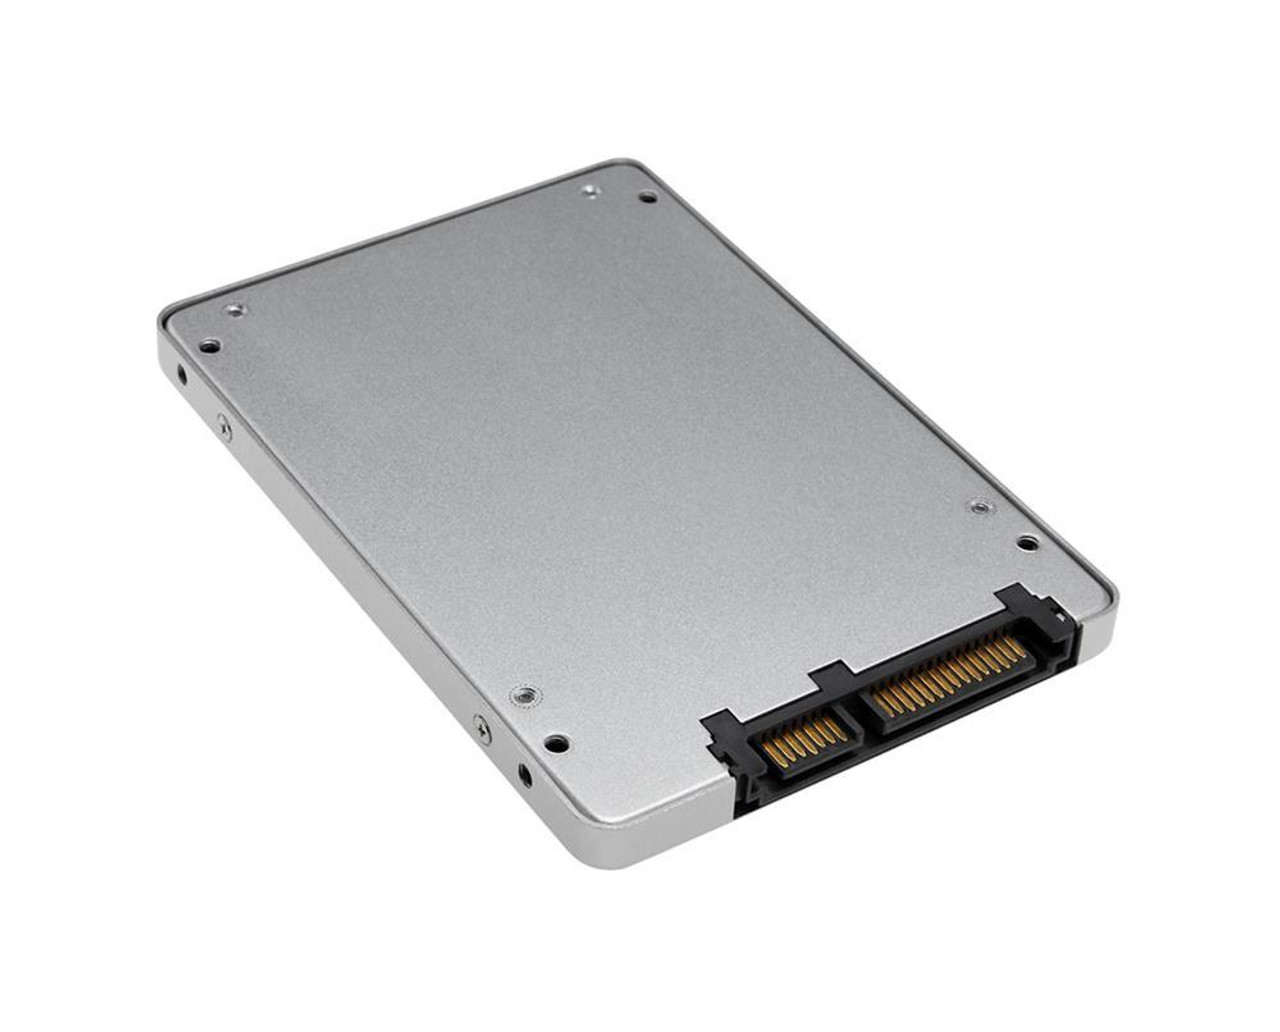 03B01-00020300 ASUS 256GB SATA 6Gbps 2.5-inch Internal Solid State Drive (SSD)